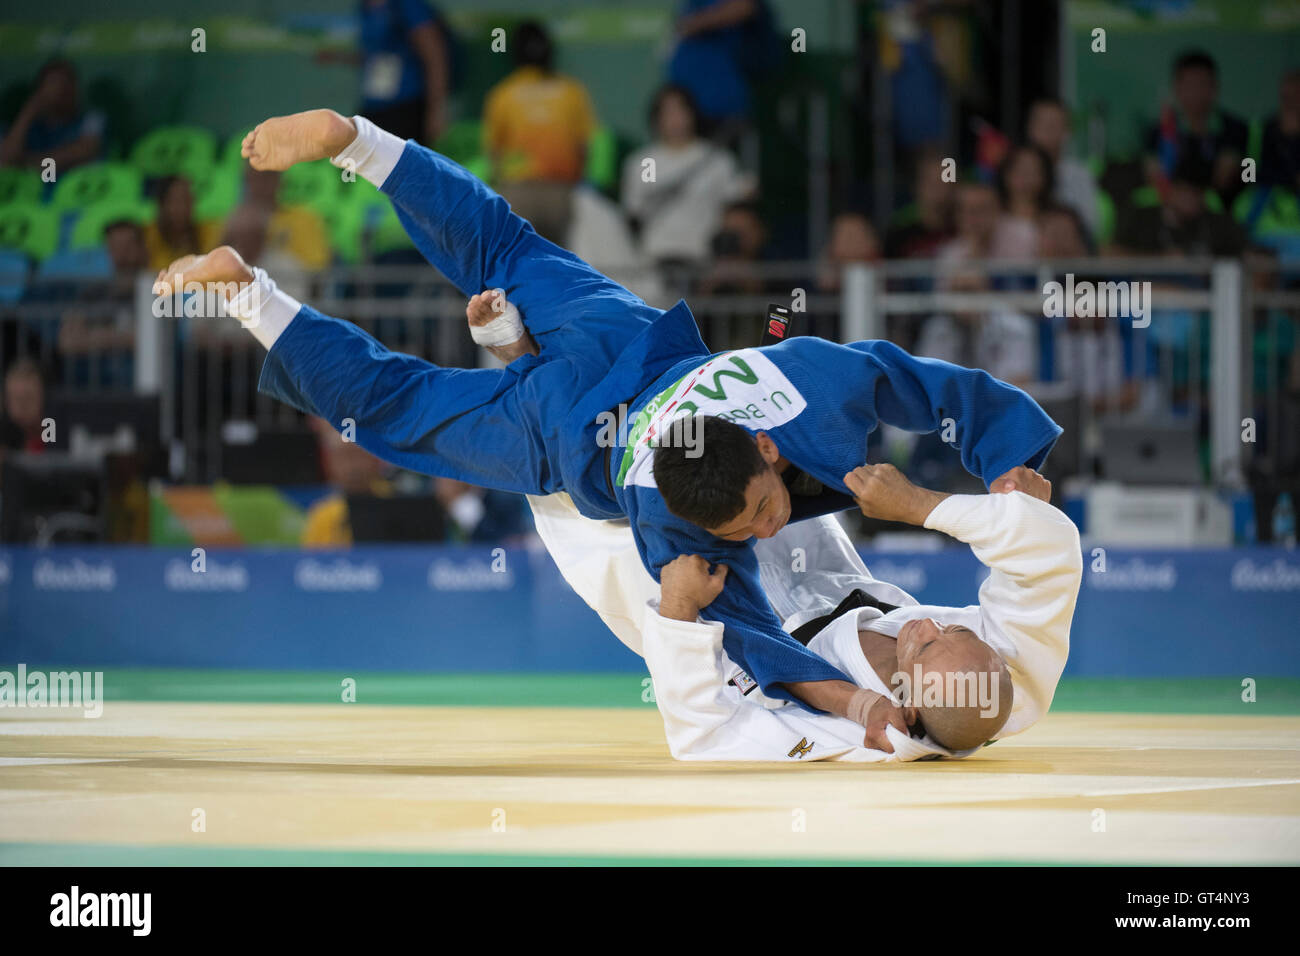 Rio de Janeiro, Brazil. 8th September, 2016. Uugankhuu Bolormaa of Mongolia (blue) is thrown by Hirose Makoto of Japan during the 60kg semi final in men's judo on the first day of competition at the 2016 Paralympic Games.  Makoto won the match. Credit:  Bob Daemmrich/Alamy Live News Stock Photo